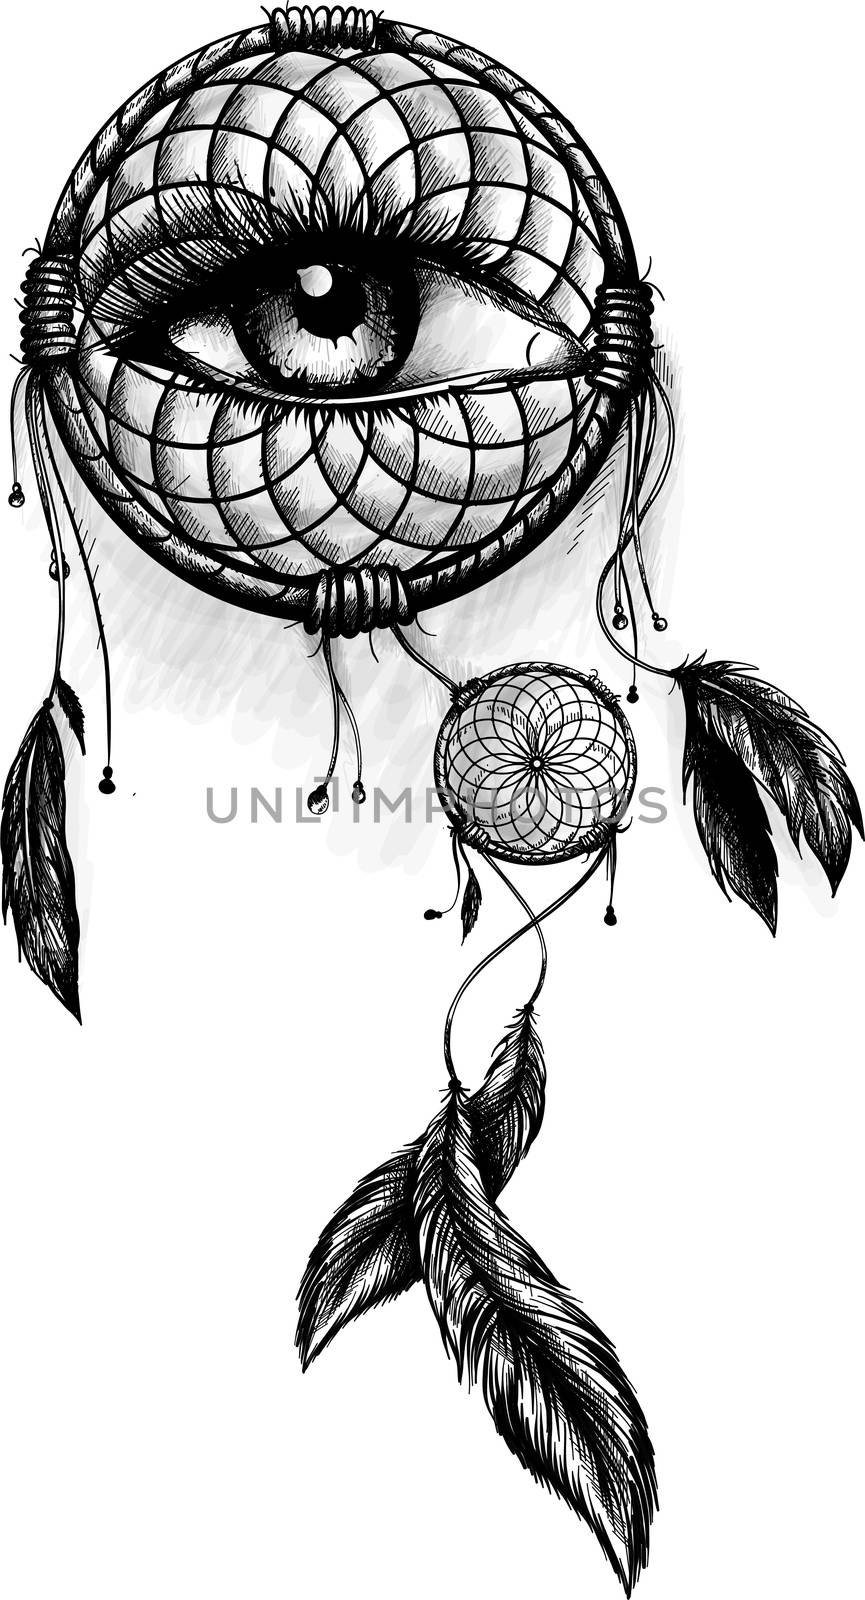 Fashion illustration with dream catcher and flowers.